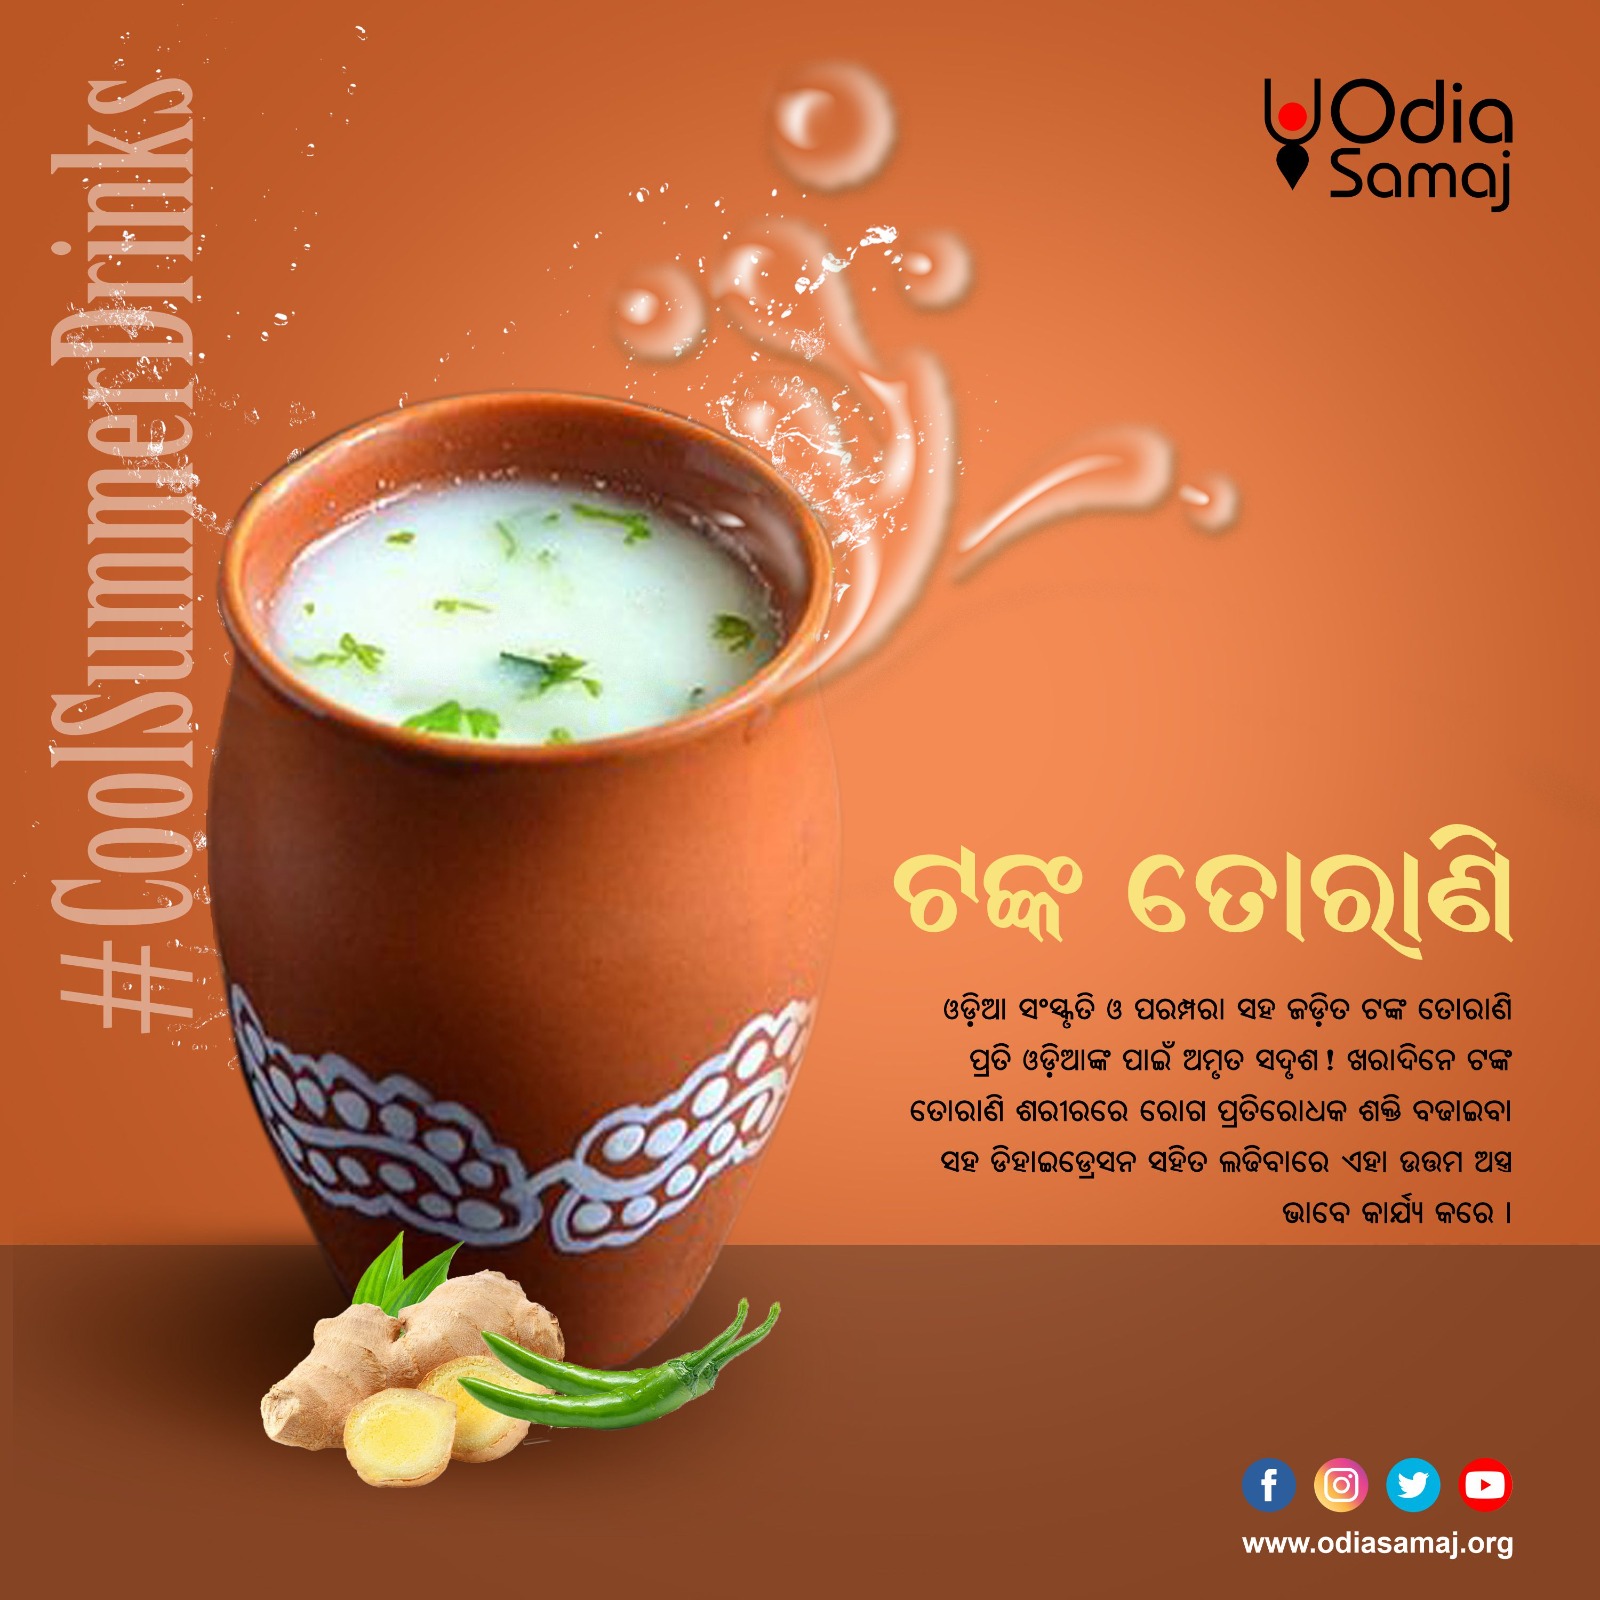 Tanka Torani associated with Odia culture and traditions is like an elixar for Odias